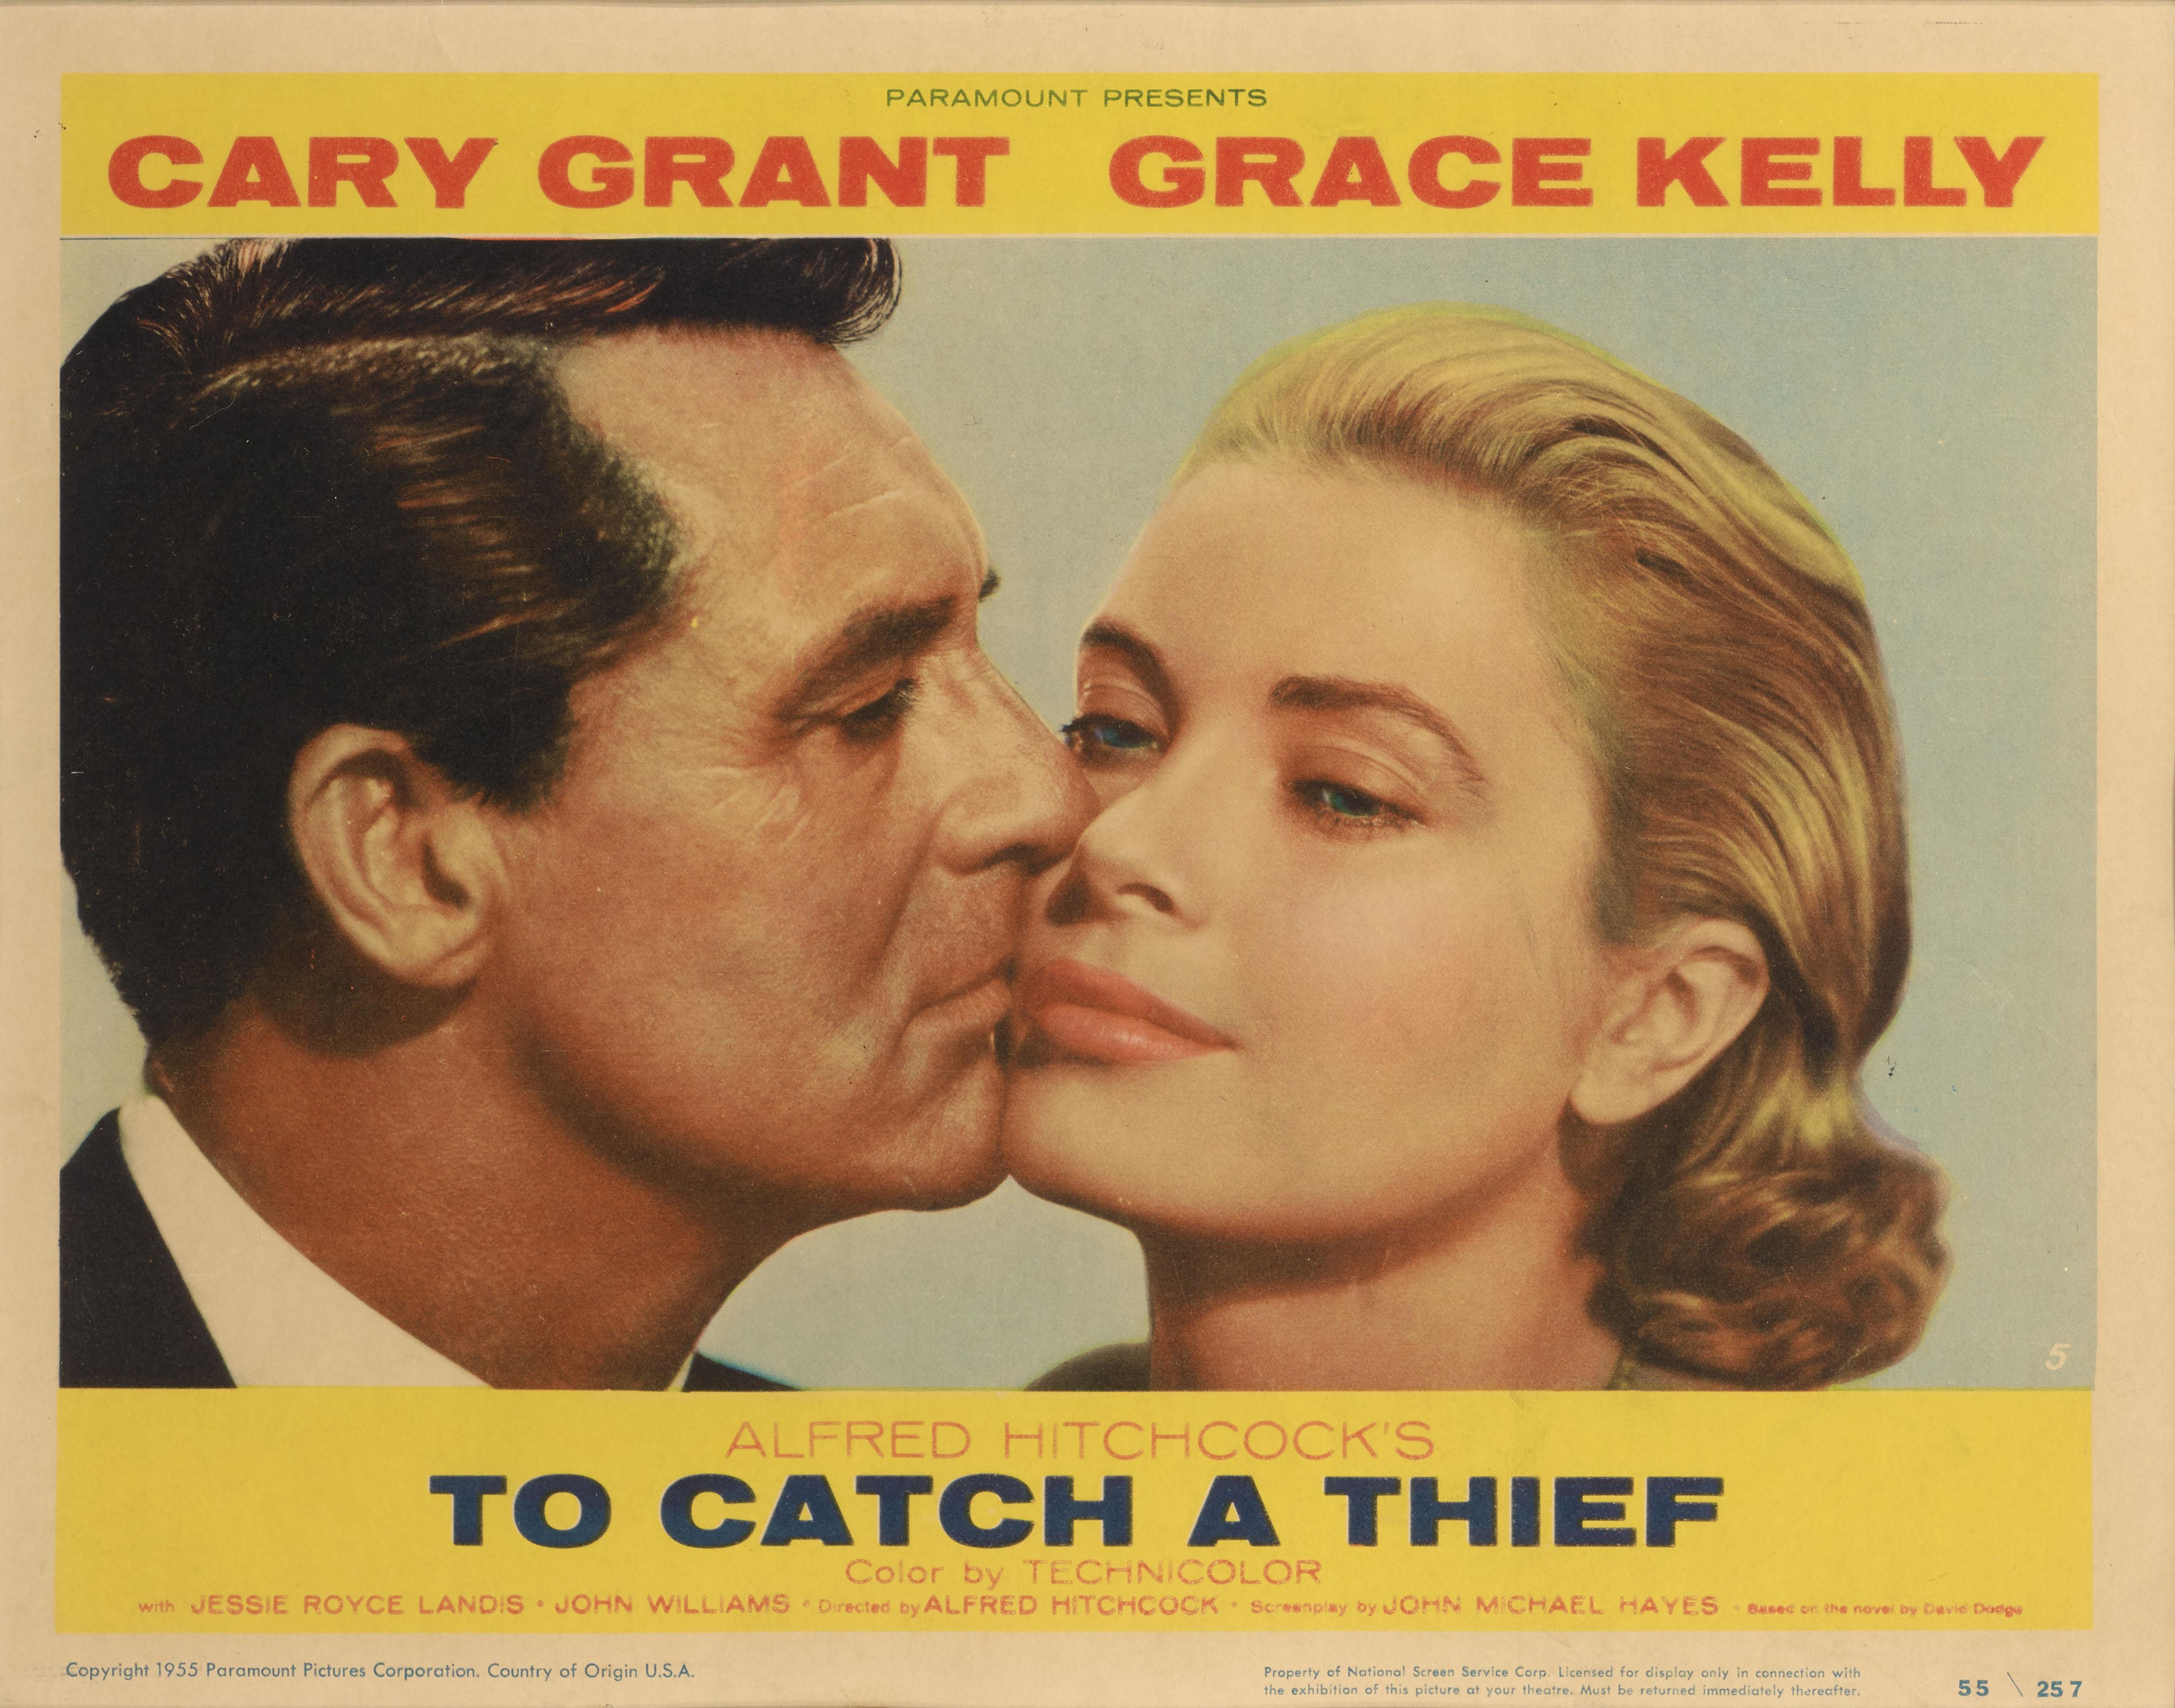 Original US lobby card for the classic 1955 Alfred Hitchcock thriller To Catch a Thief.
This film starred Cary Grant and Grace Kelly.
This is the best card from the original US set of lobby cards.
This lobby card is conservation framed with UV